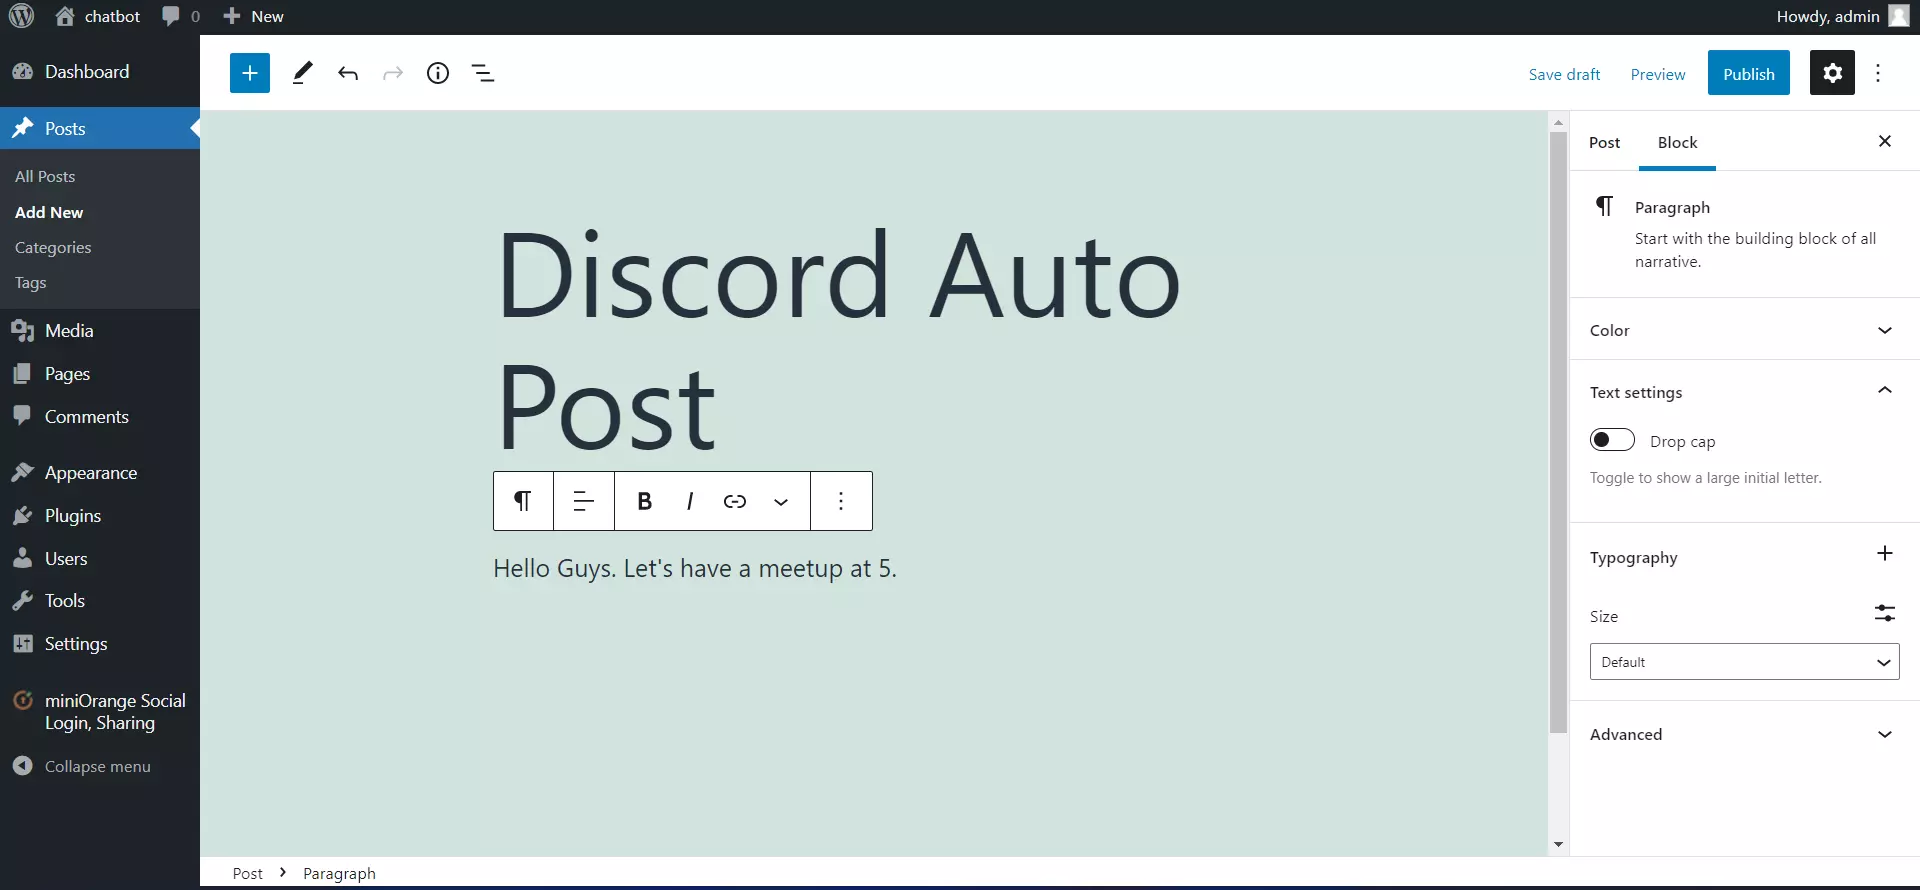 enter title nd content to automatically post wordpress post to discord server